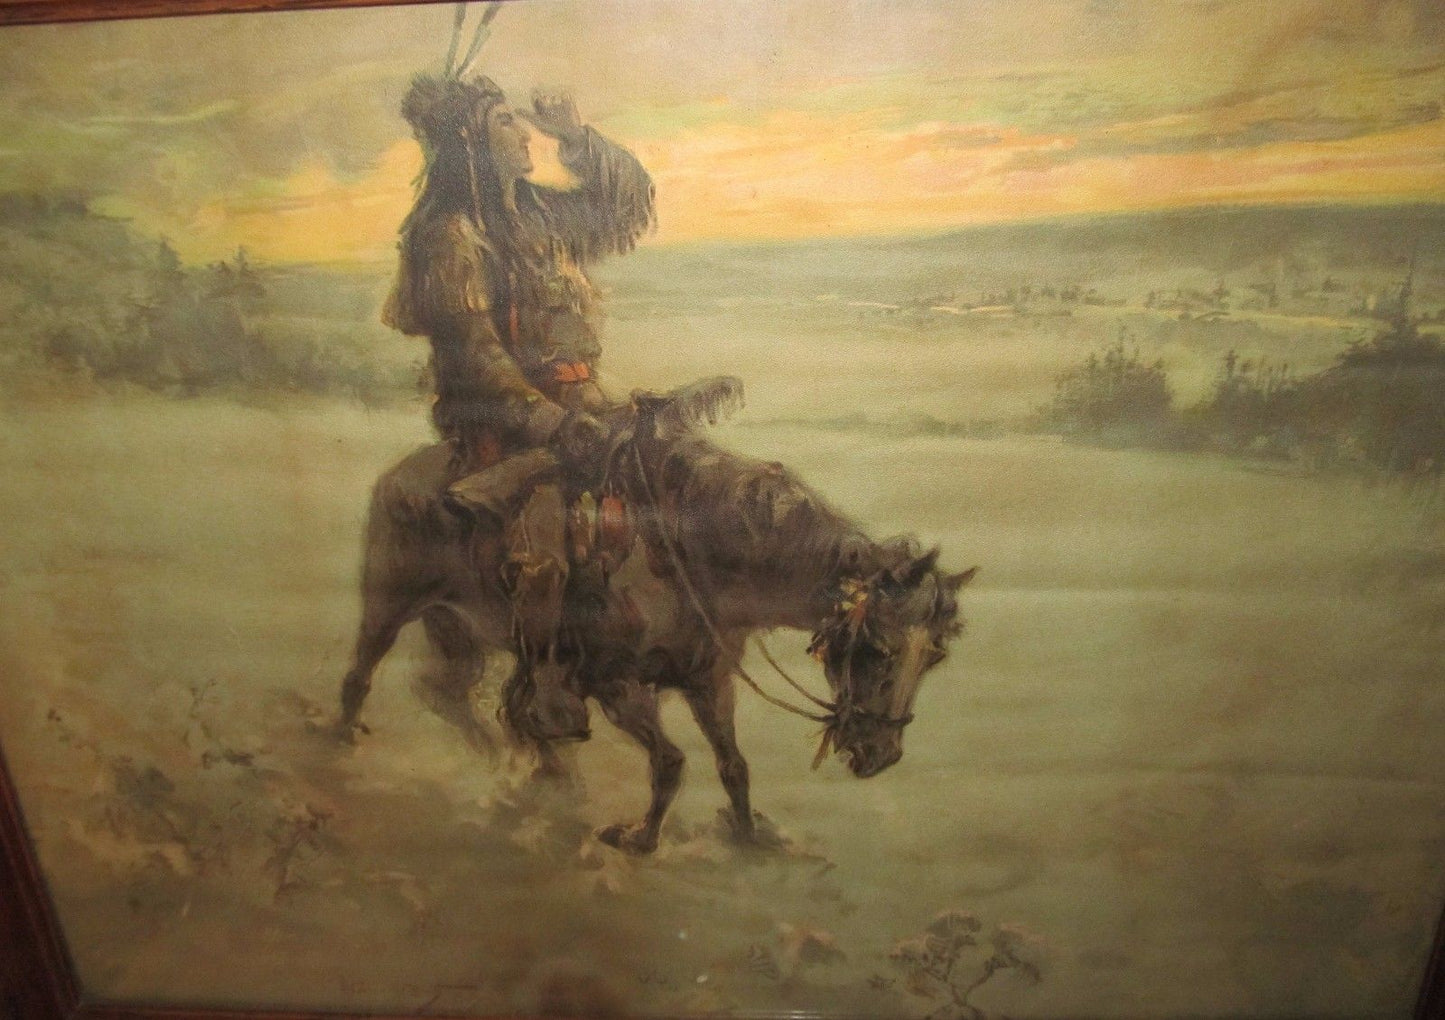 WALTER GRANVILLE SMITH'S LONE MOUNTED WARRIOR IN OAK WITH BRASS MOUNTED FRAME